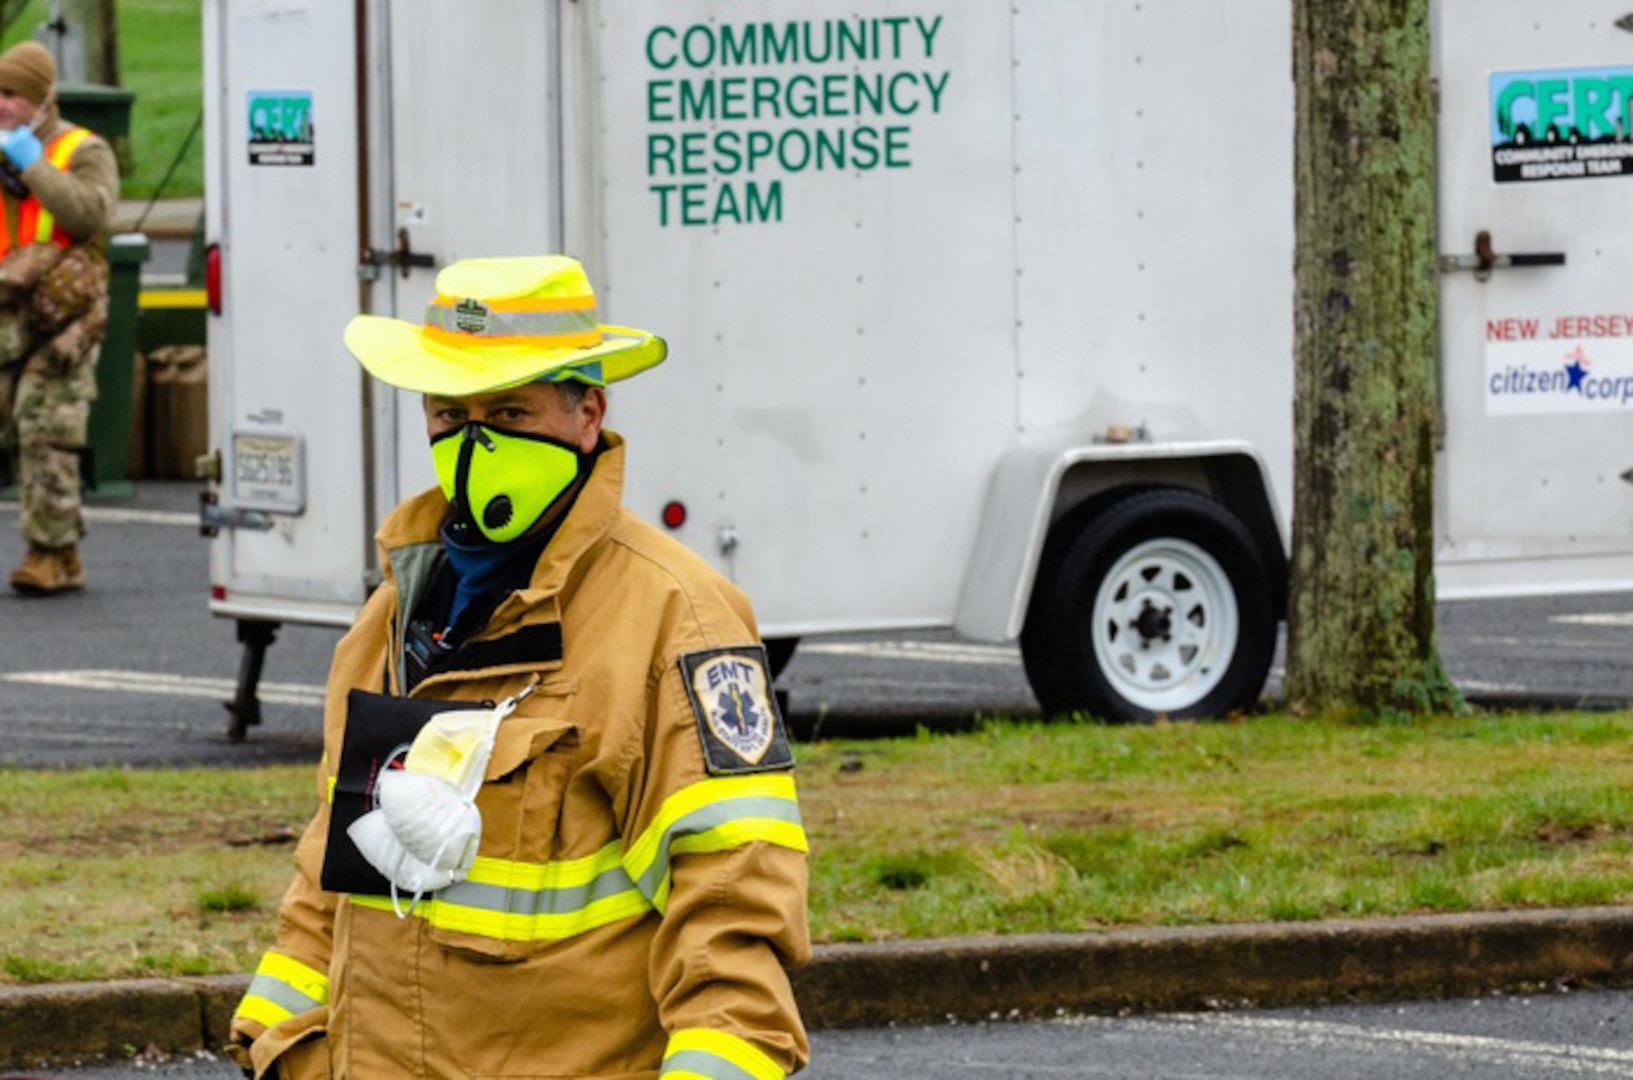 An emergency responder in a reflective yellow coat stands in the foreground in a parking lot with a trailer in the background labeled "Community Emergency Response Team."